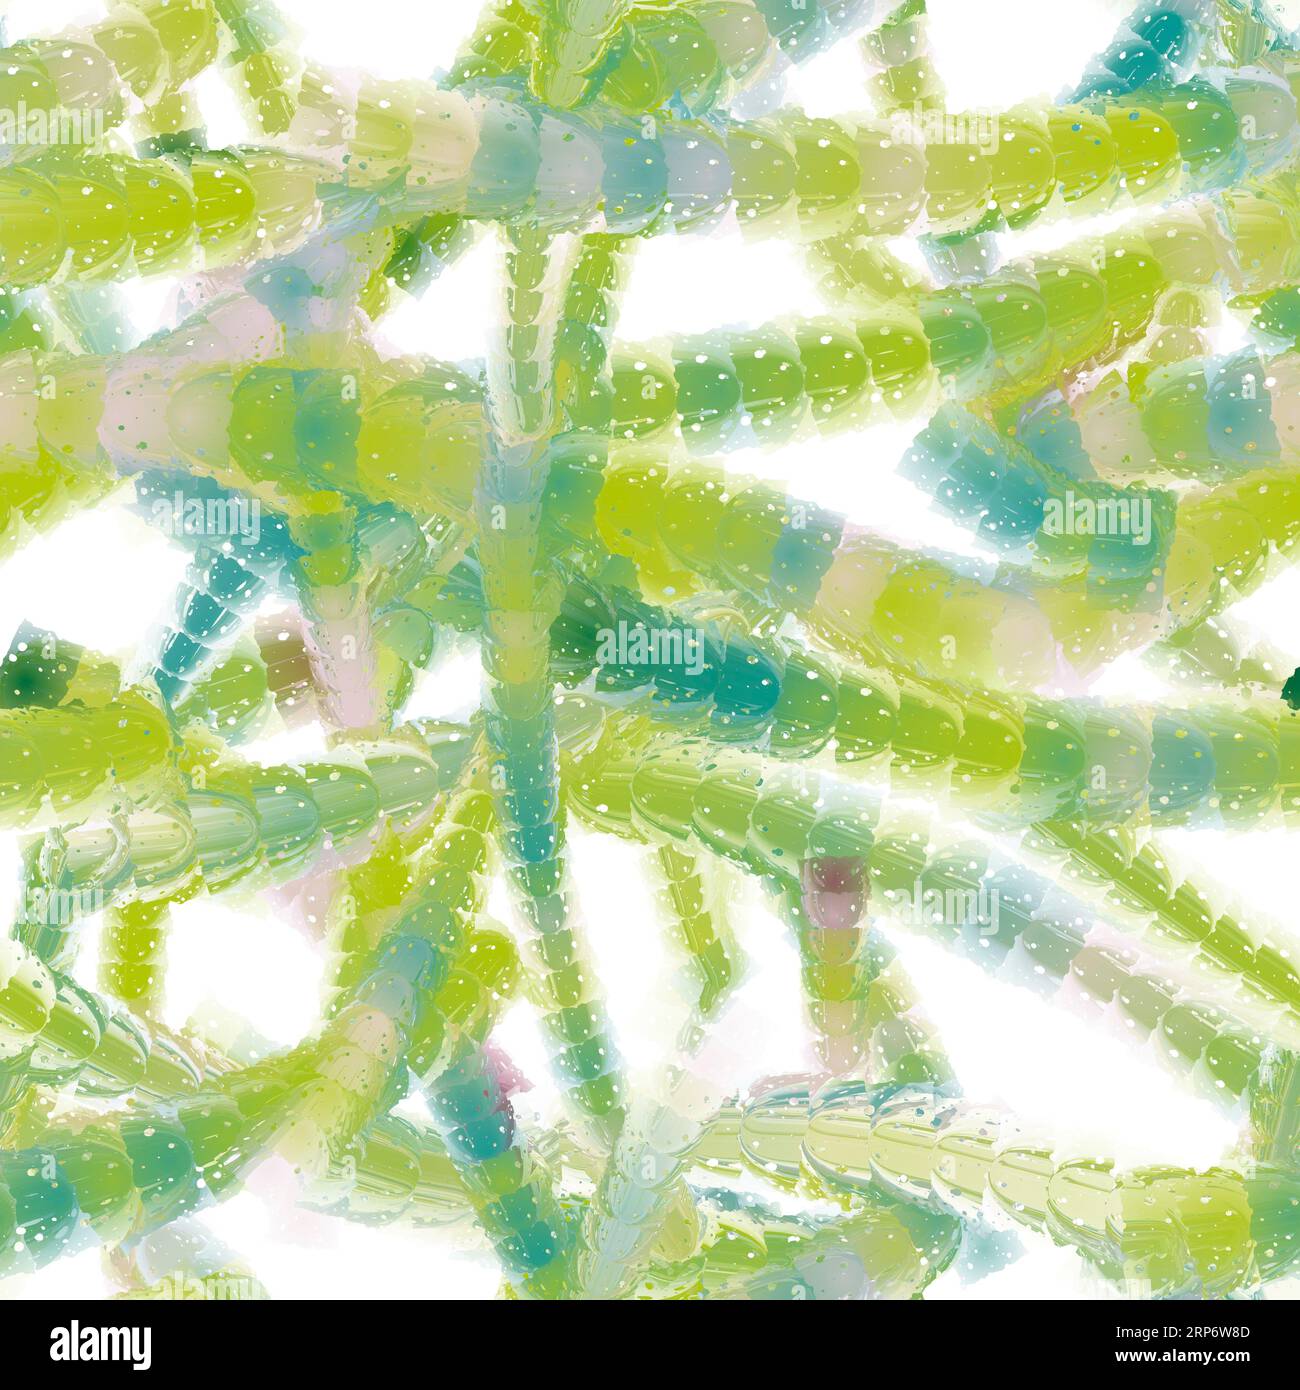 Bright long green and blue colored liquid brush strokes with reflection. Multicellular organism imitation. Candy imitation. Seamless pattern Stock Photo